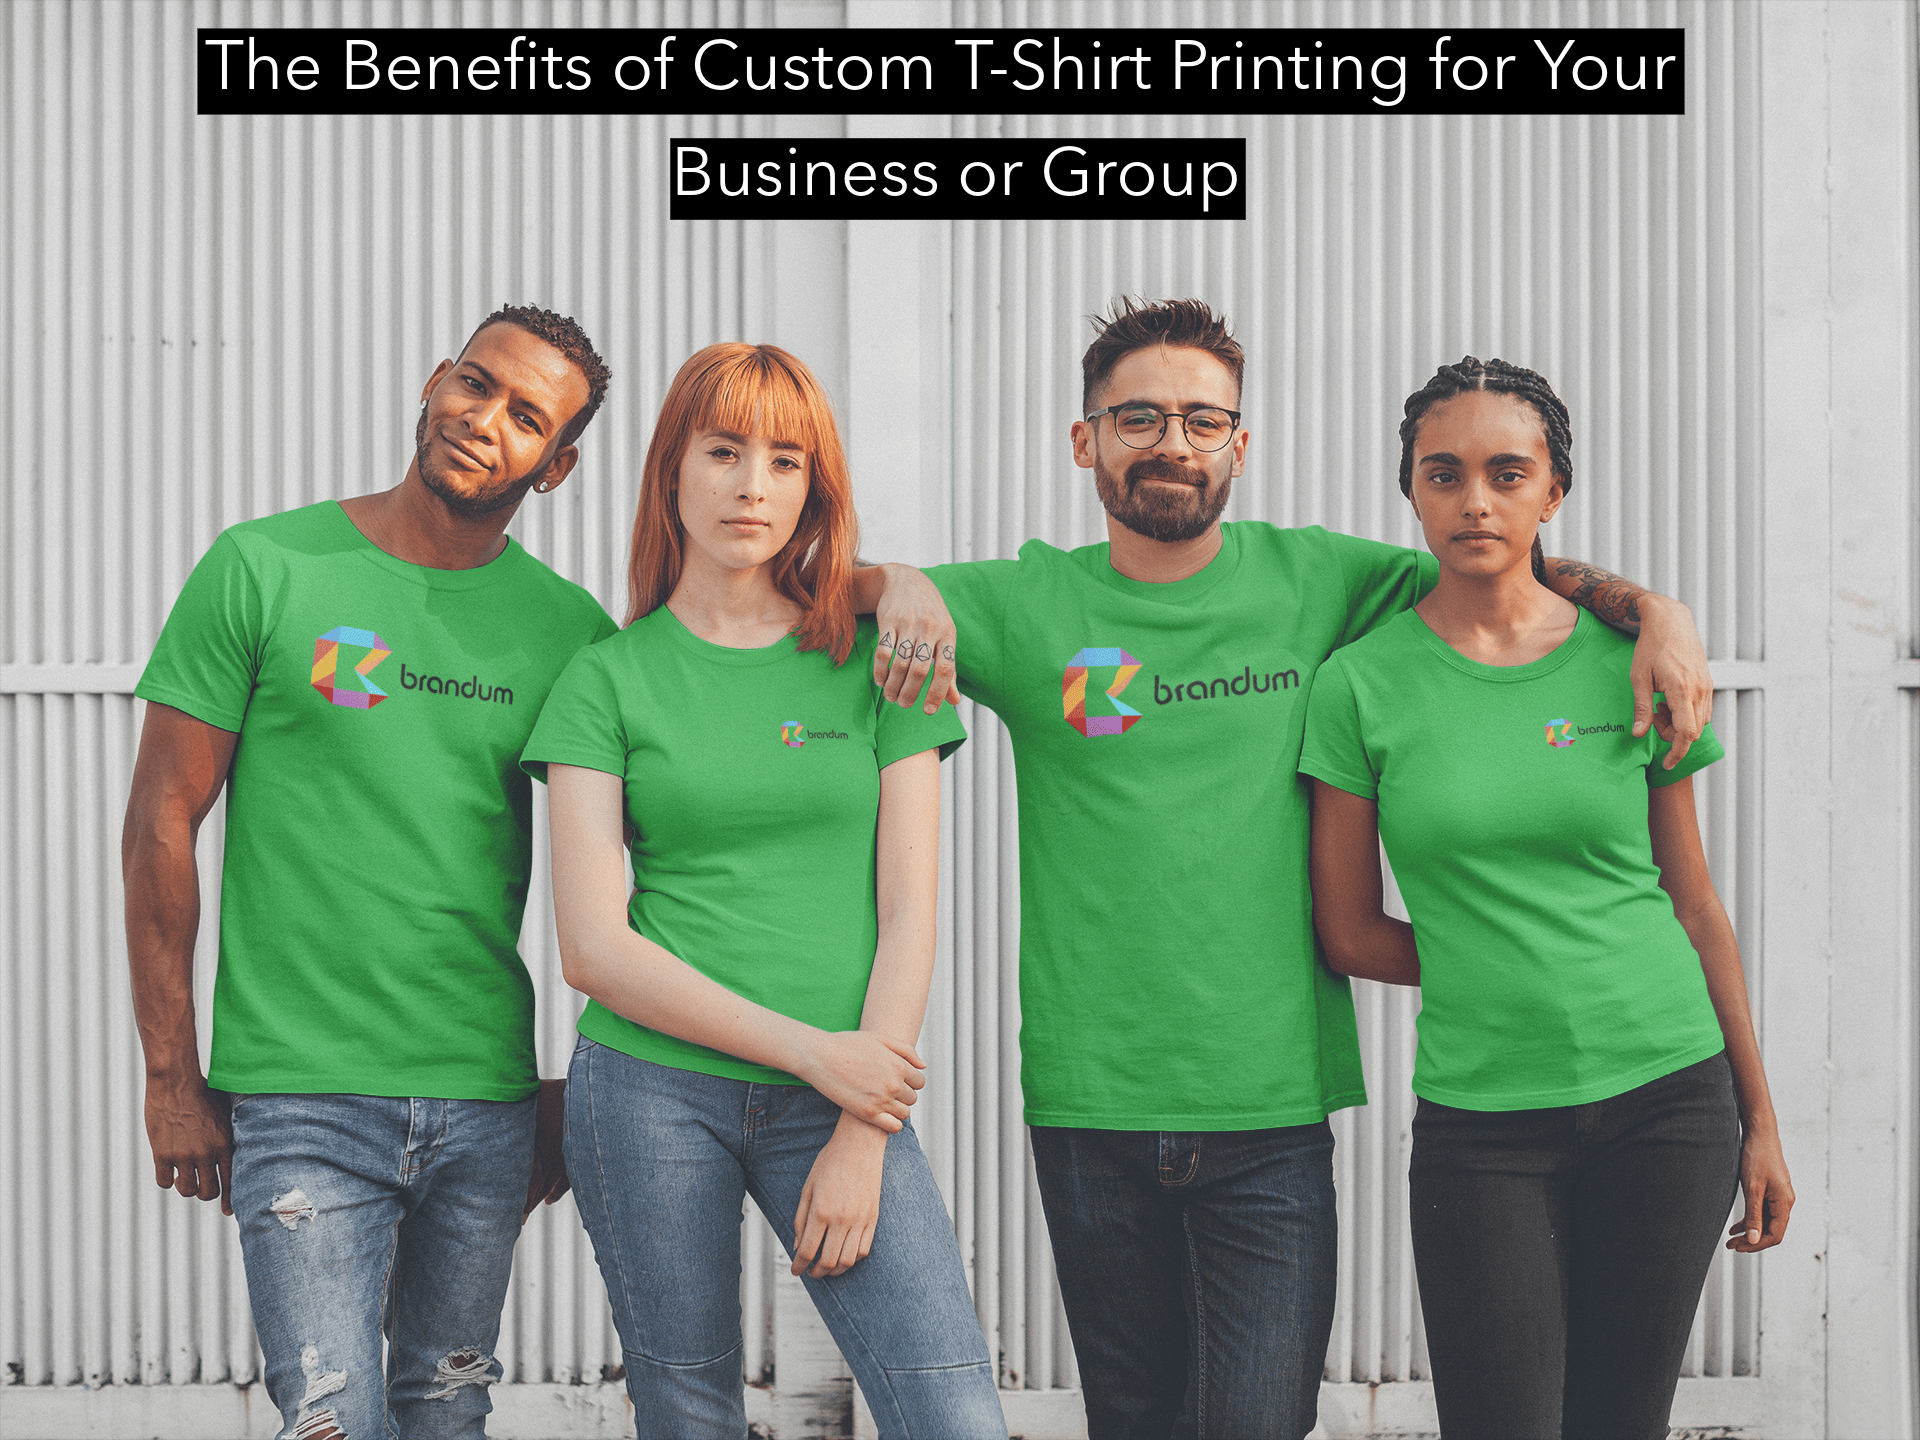 The Benefits of Custom T-Shirt Printing for Your Business or Group